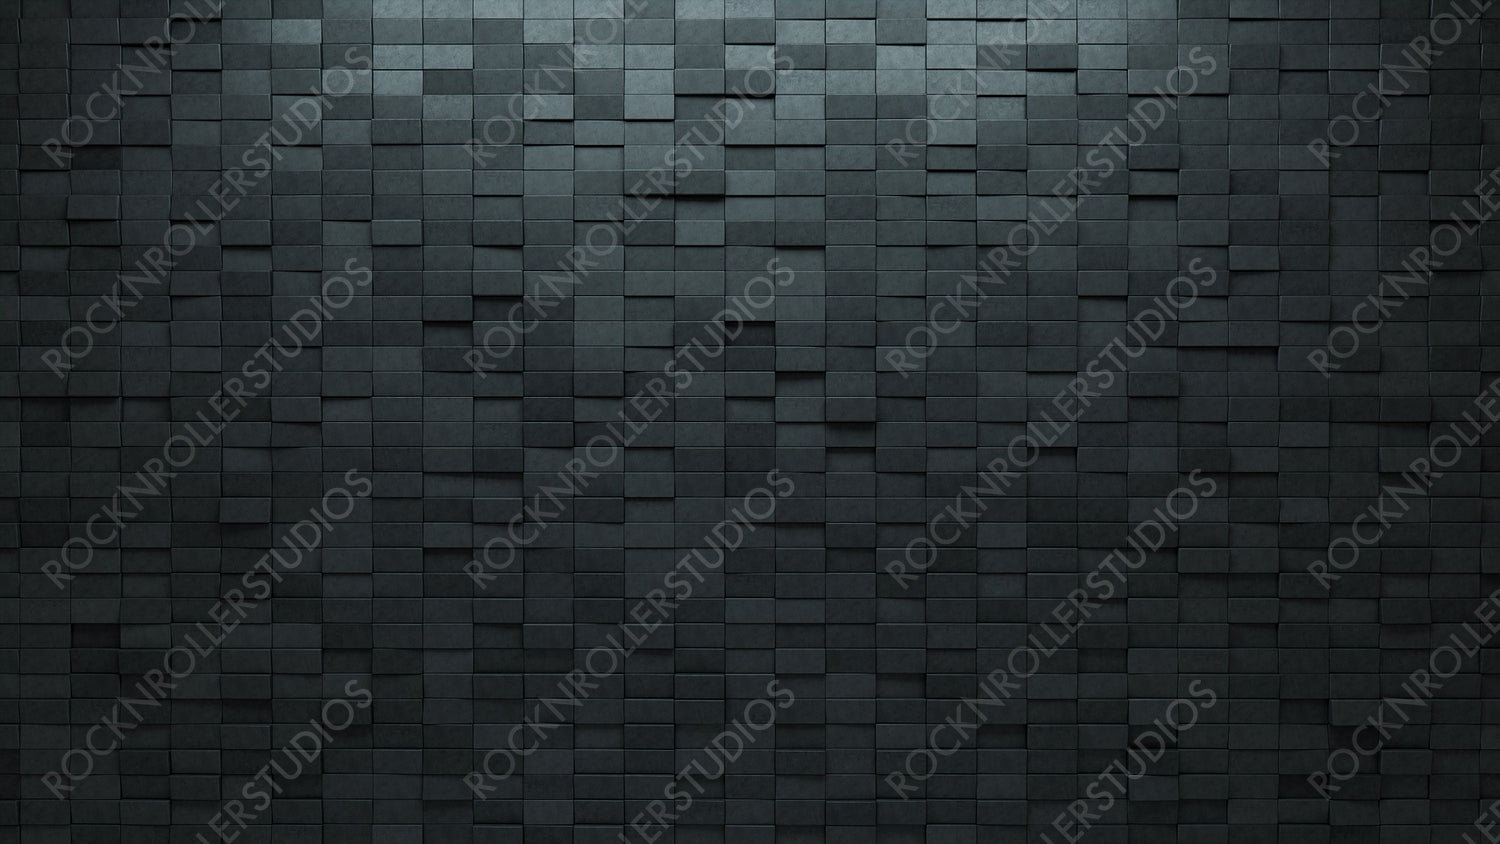 3D, Concrete Mosaic Tiles arranged in the shape of a wall. Rectangular, Polished, Bricks stacked to create a Semigloss block background. 3D Render